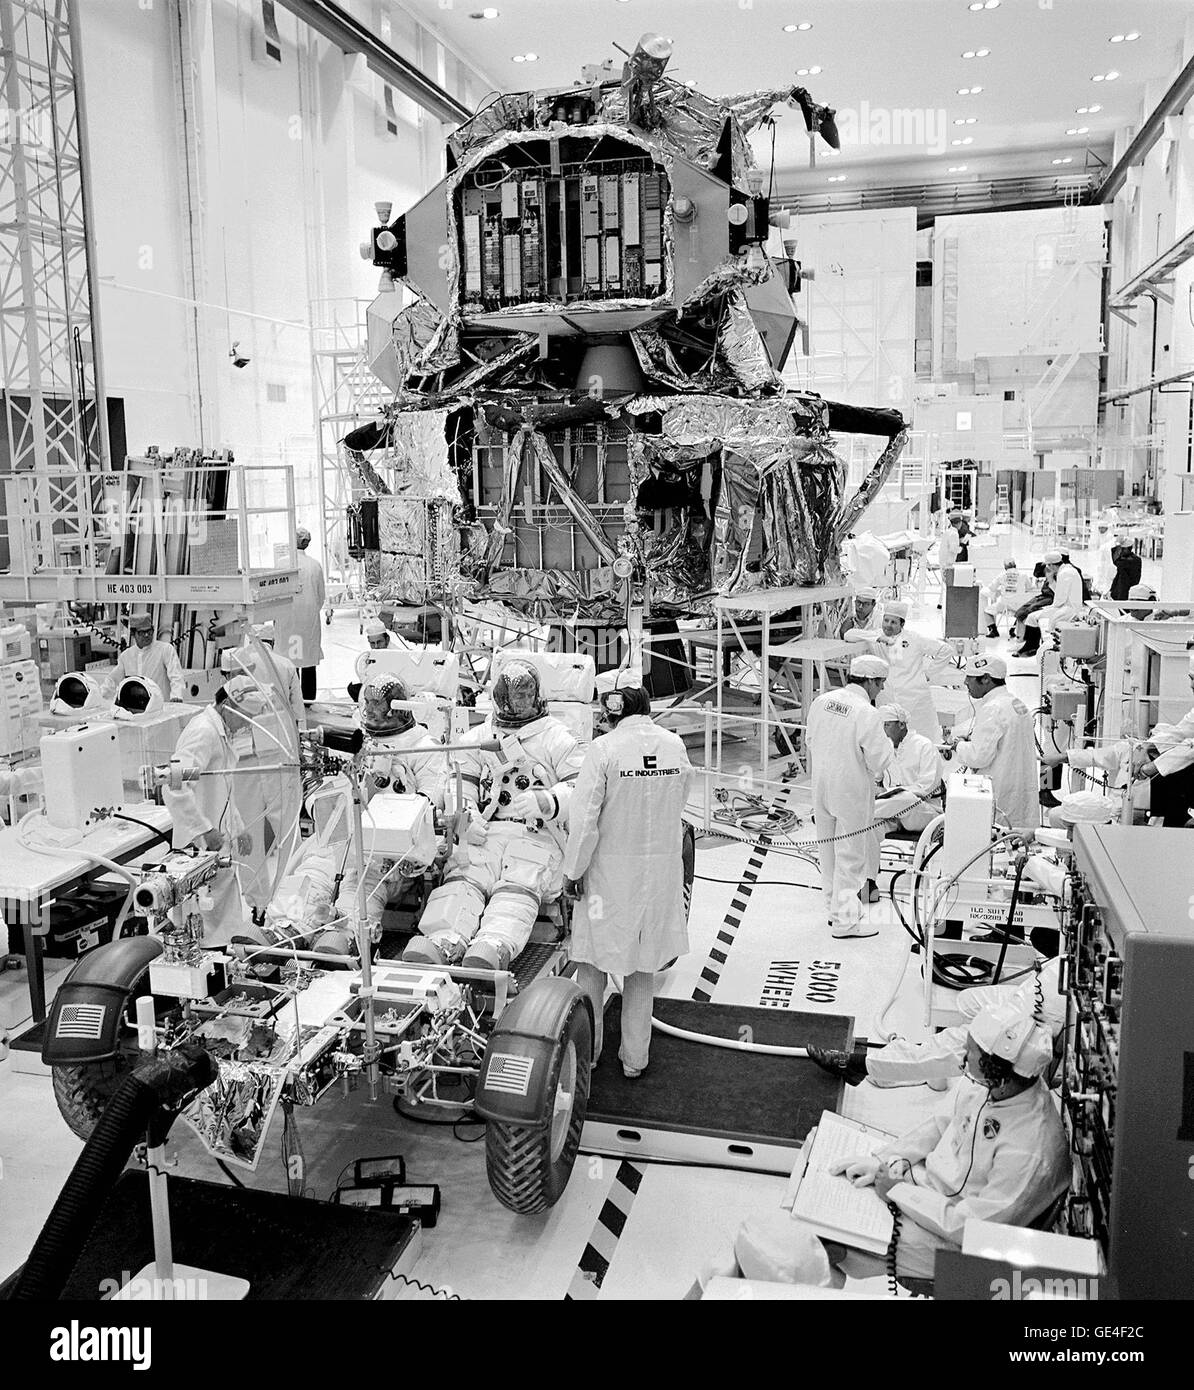 (August 9, 1972) The Kennedy Space Center launch team is shown here continuing the checkout of Apollo 17 flight hardware for the final lunar exploration mission of Project Apollo. A mission simulation to check out the lunar roving vehicle and all its systems was successfully carried out. Participating in the test, conducted in conjunction with the Manned Spacecraft Center (now the Johnson Space Center) in Houston, Texas, were prime crew members Harrison H. Schmitt, Lunar Module Pilot, left, and Eugene A. Cernan, Commander. Rollout of the Apollo 17 space vehicle to Complex 39's Pad A happened o Stock Photo